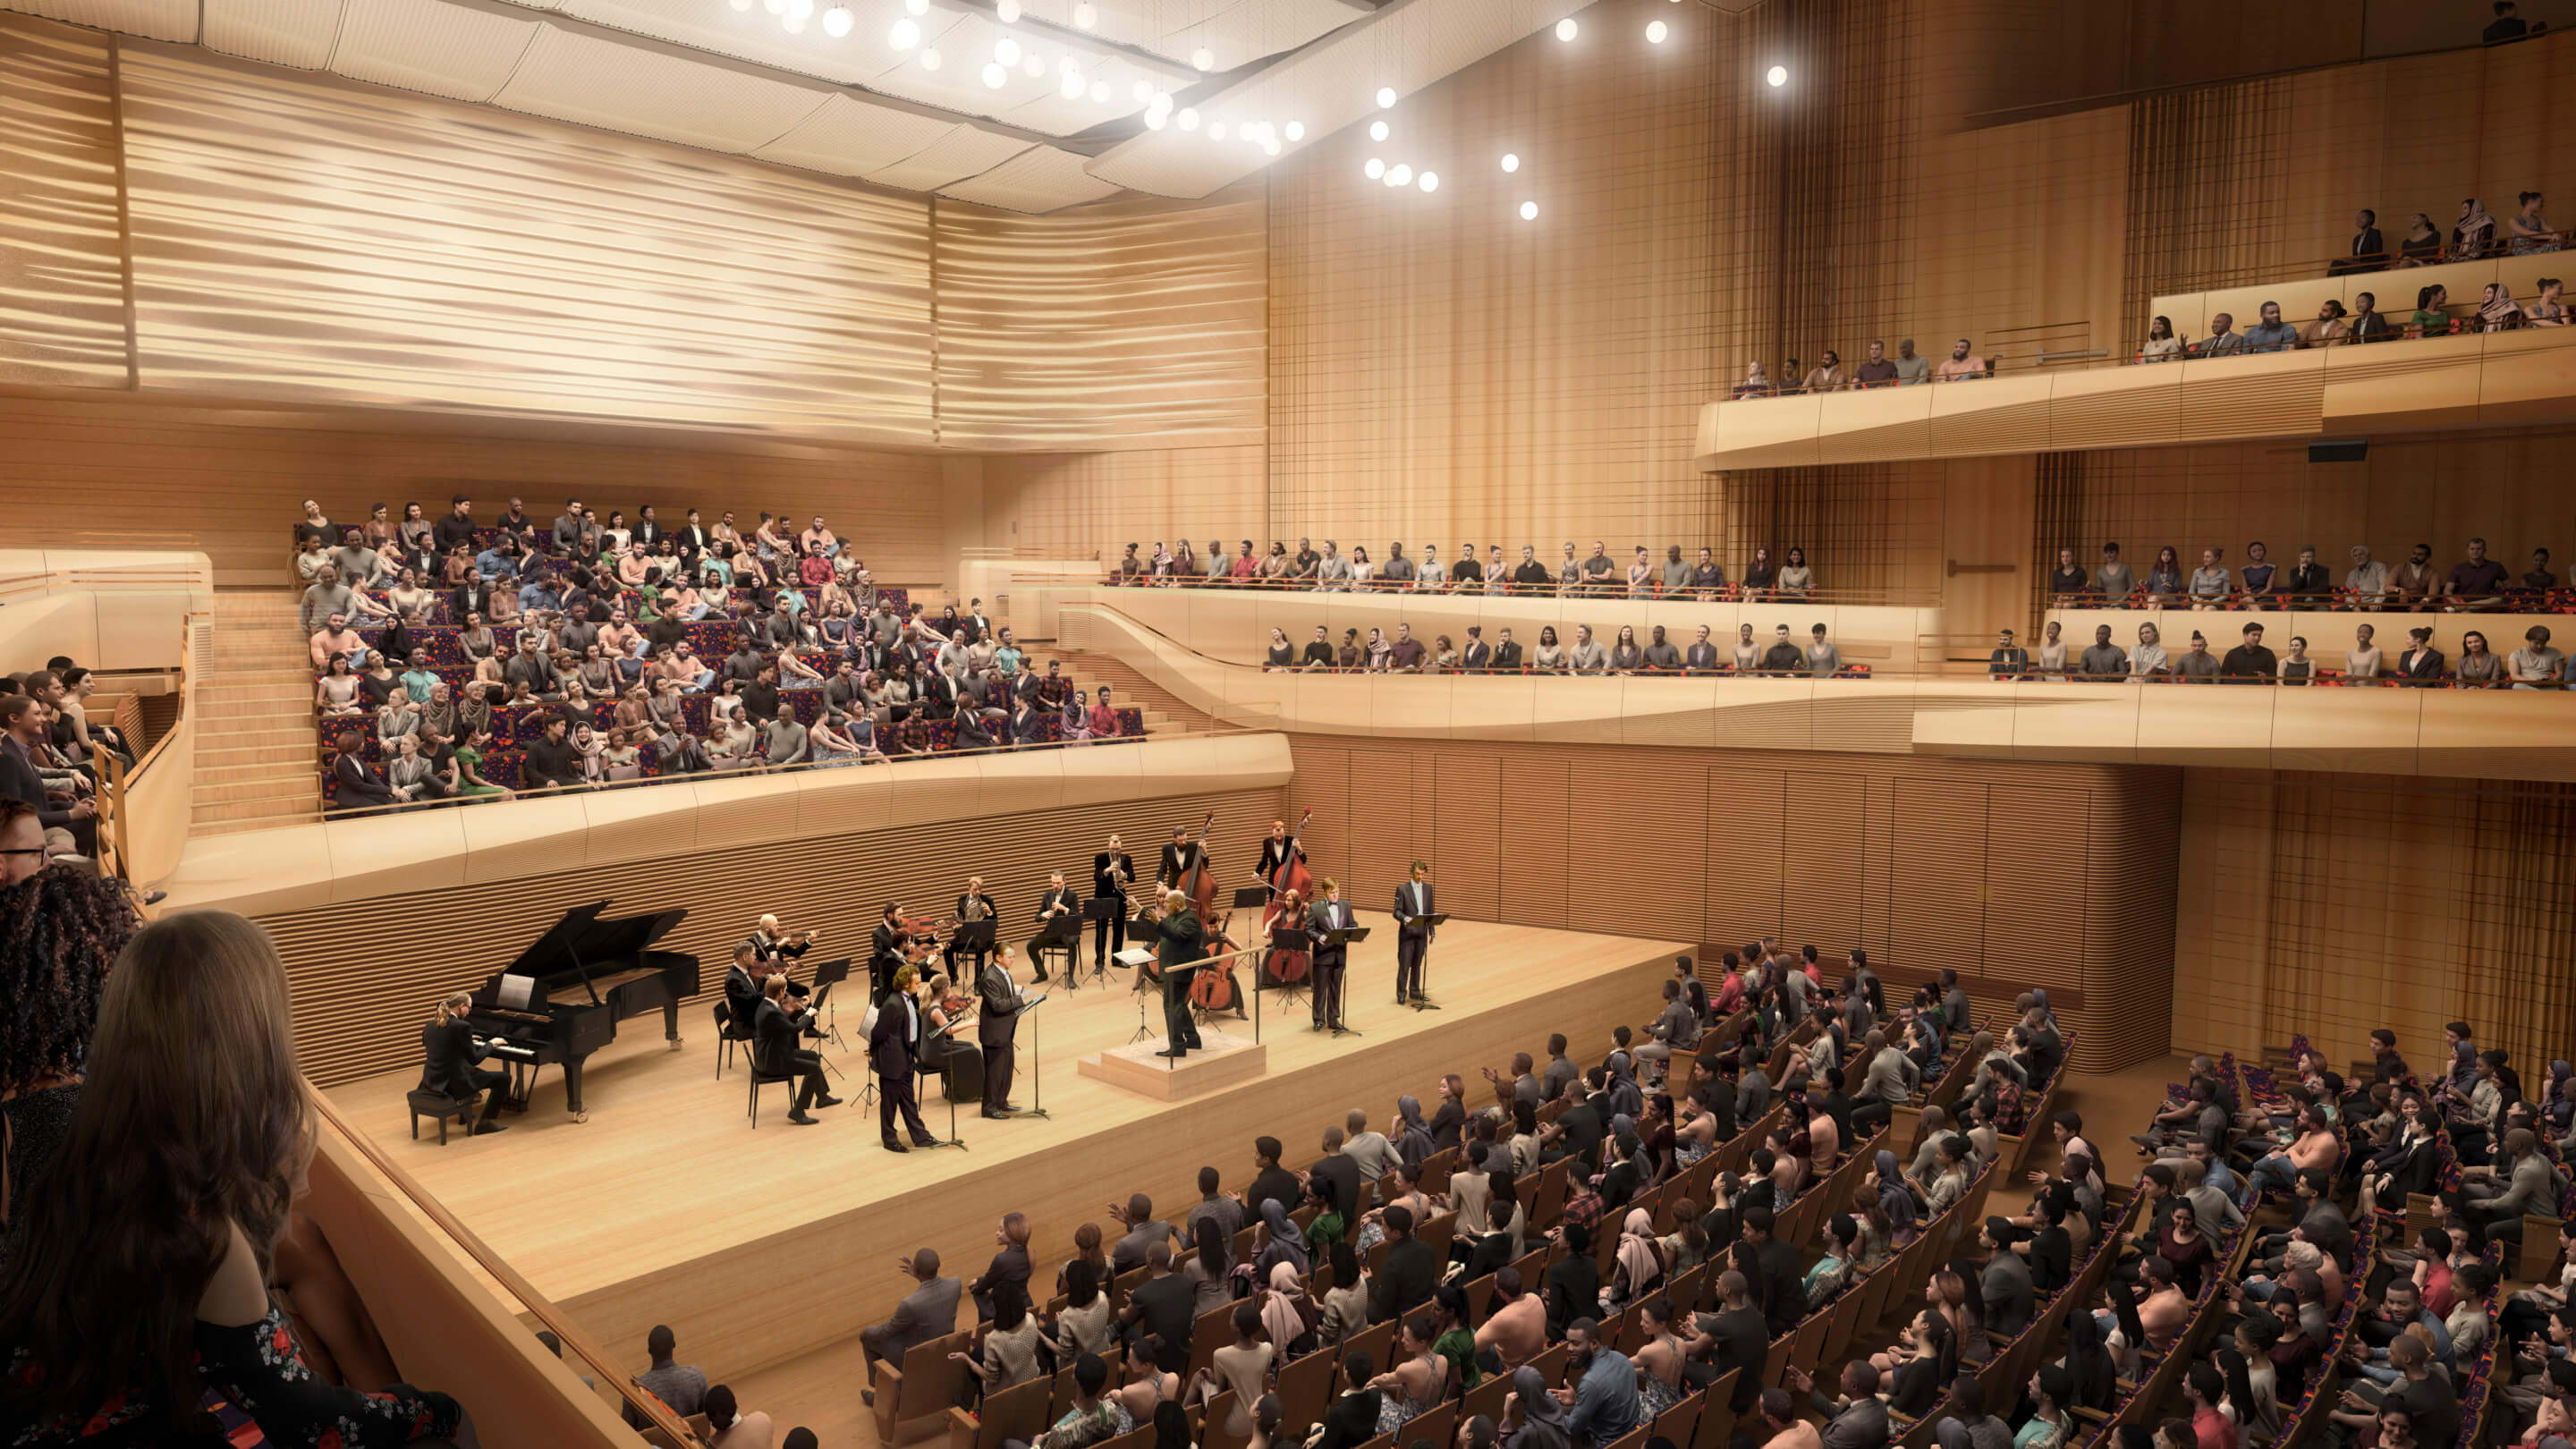 rendering of a concert hall interior